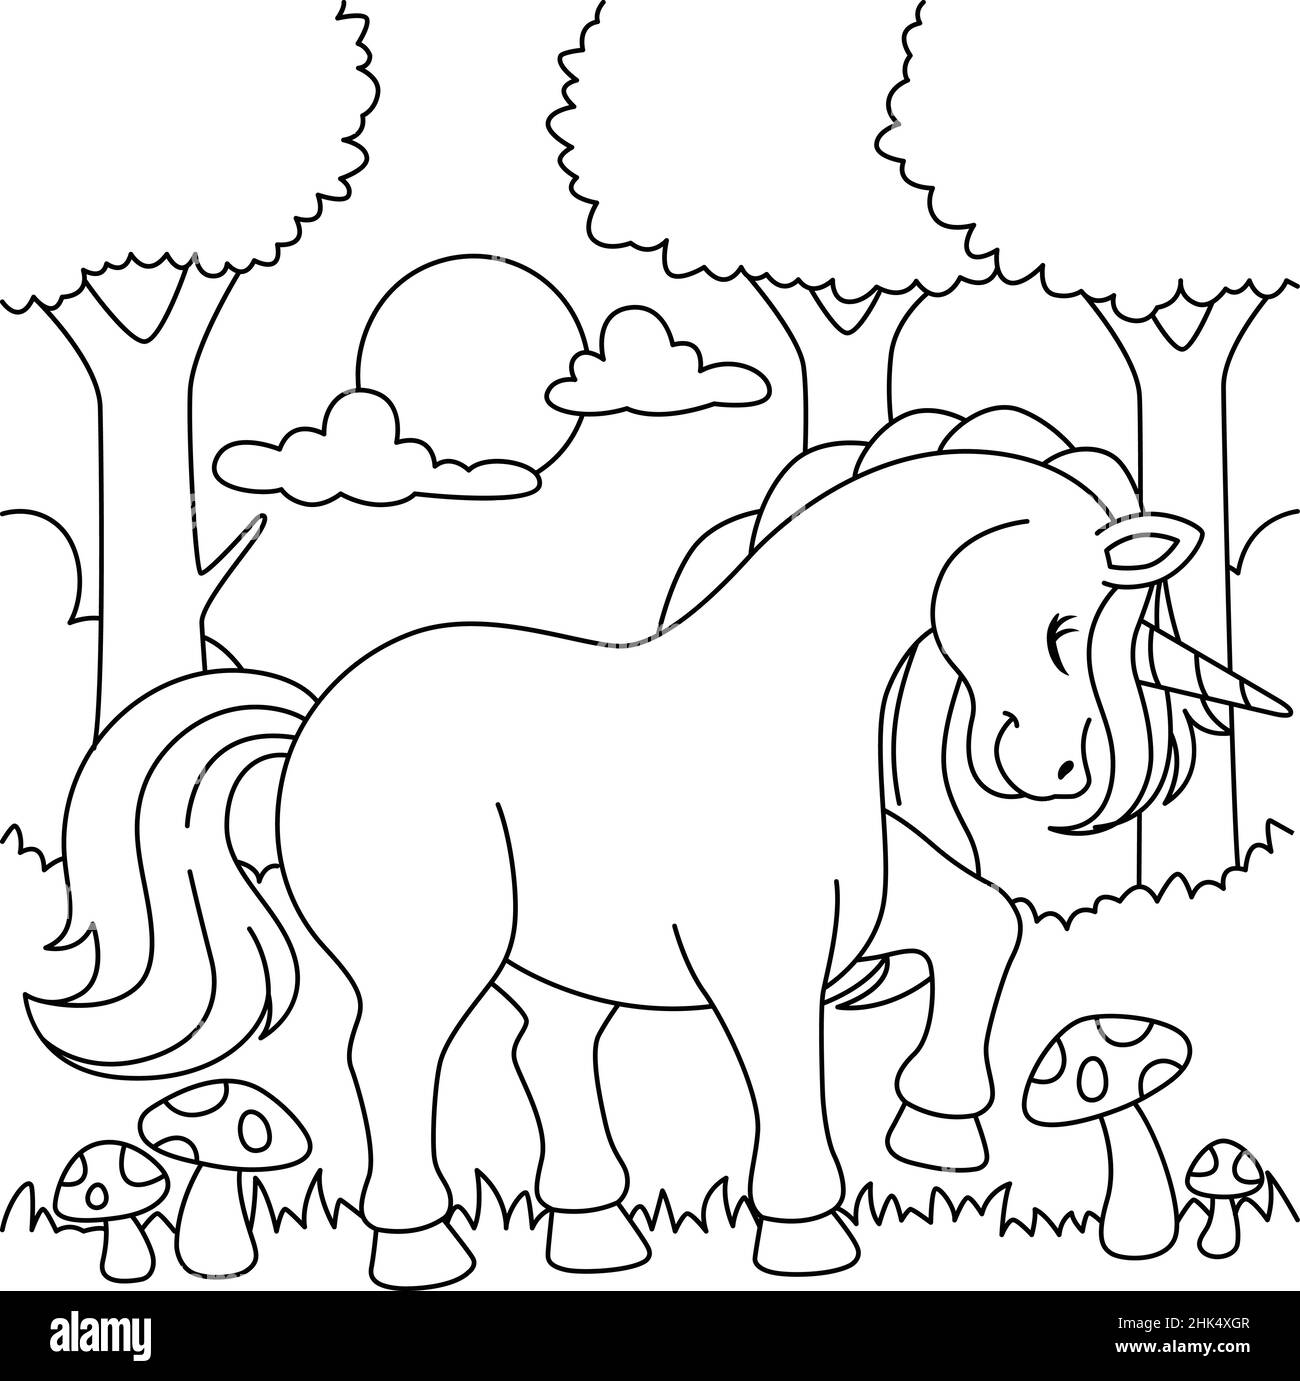 Unicorn In A Forest Coloring Page for Kids  Stock Vector